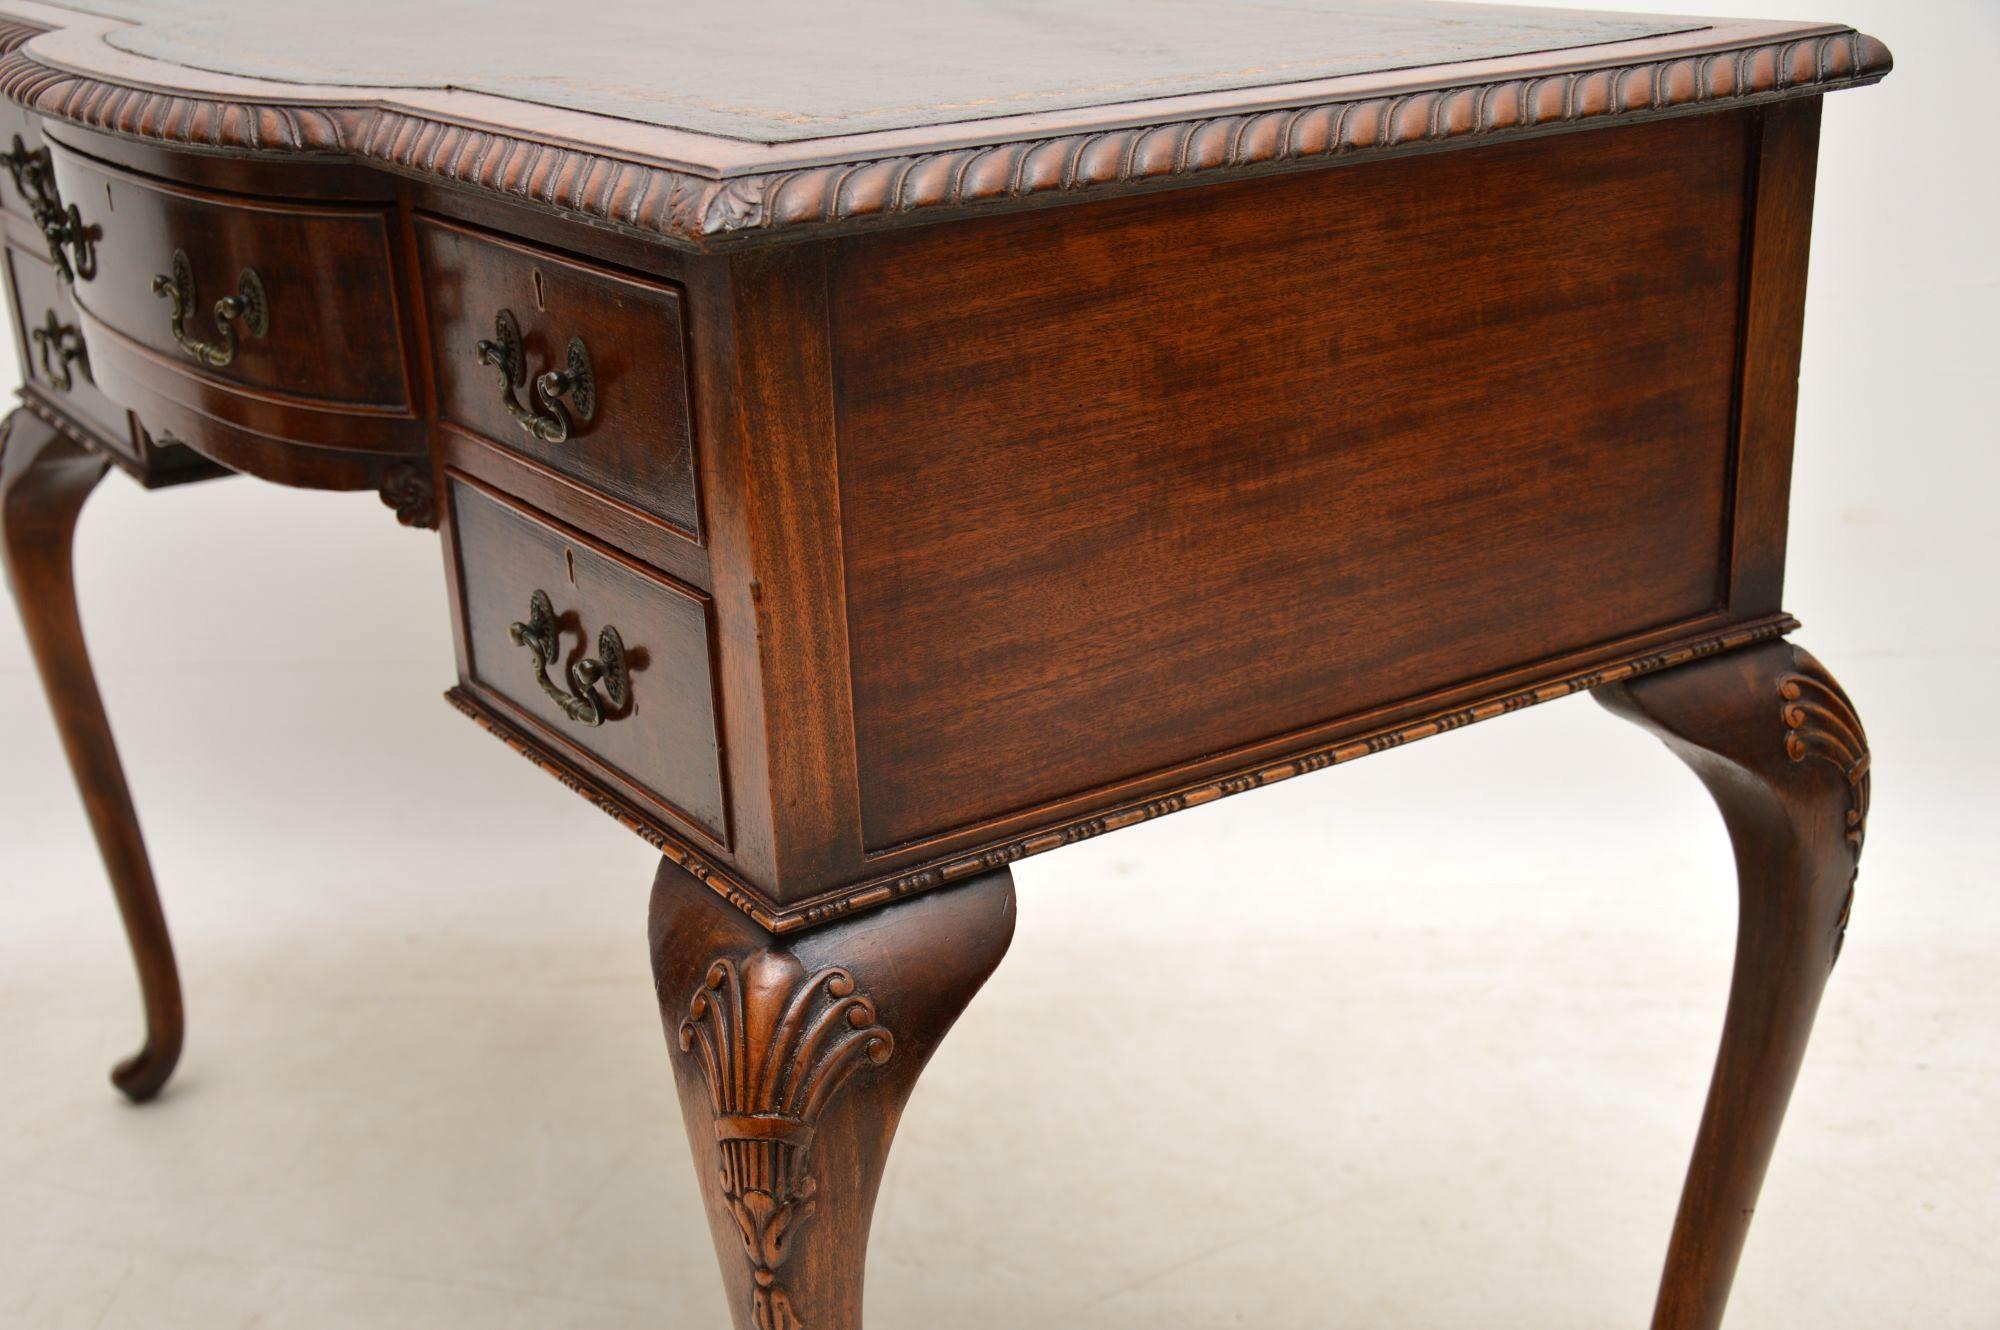 Late 19th Century Antique Mahogany Leather Top Desk